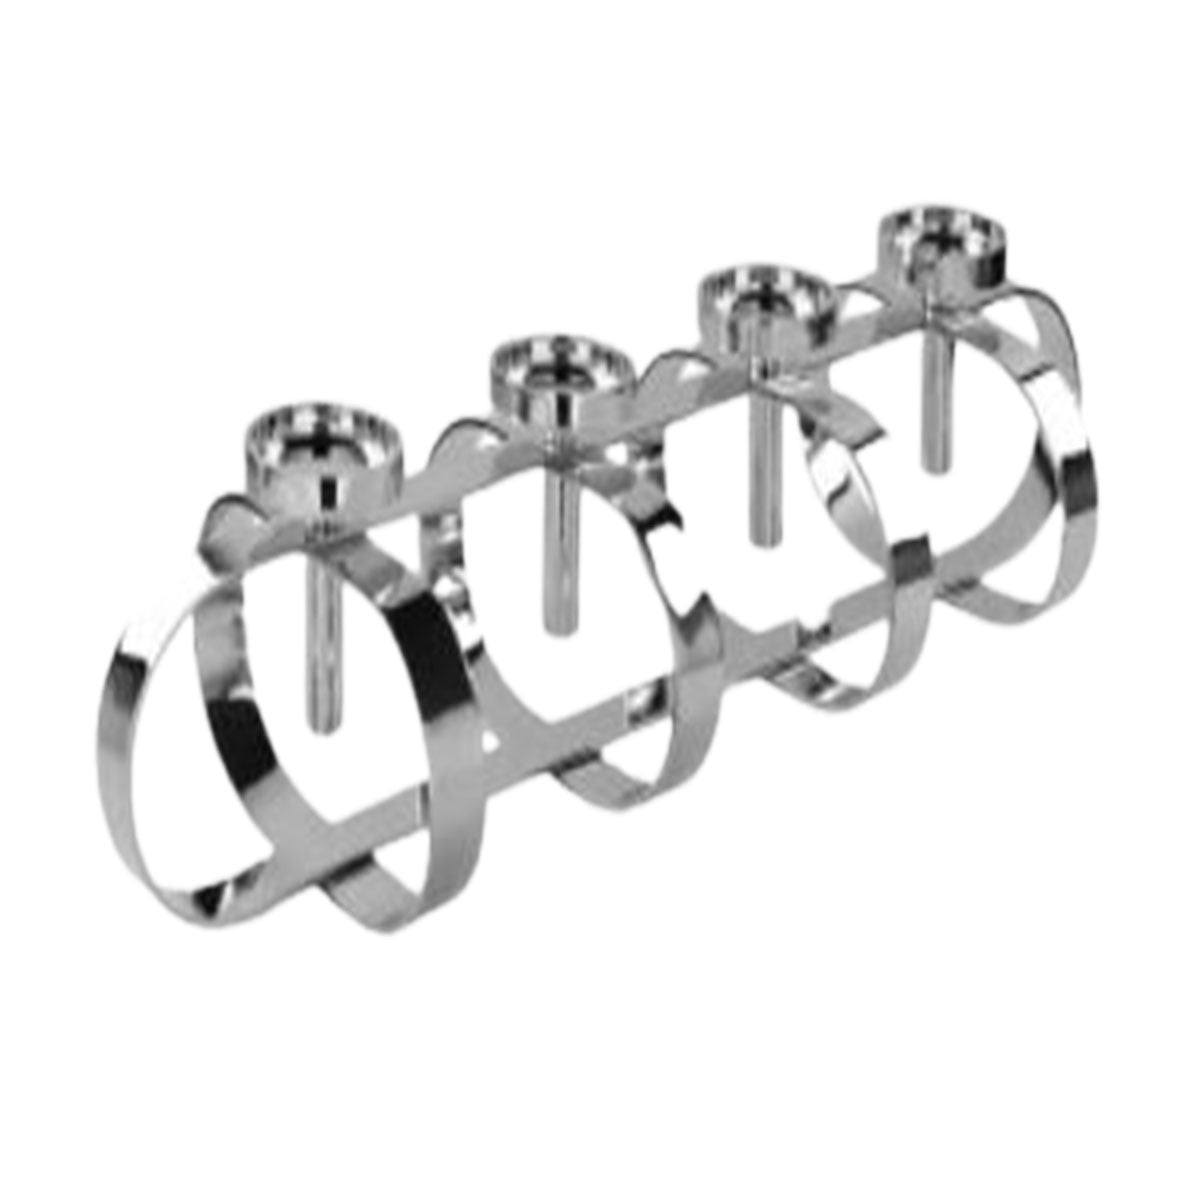 Nickel Plated Large Candle Holder